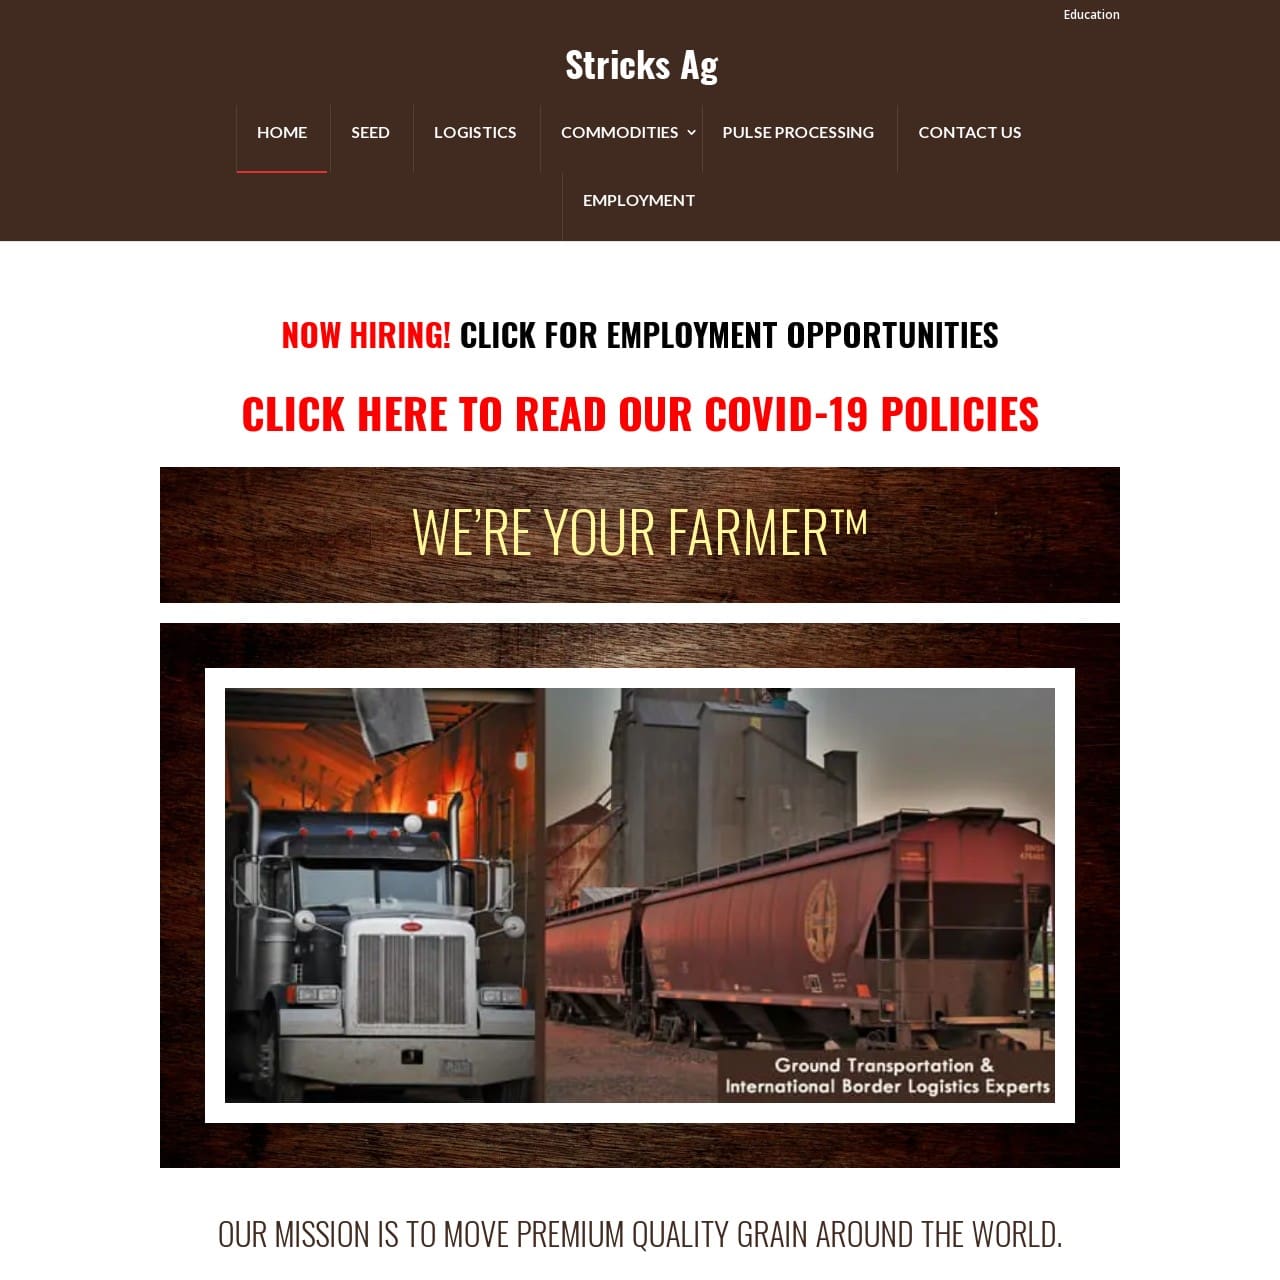 Witness the transformation as Shield Bar Marketing breathes new life into Stricks Ag's severely outdated website, delivering a fresh and captivating look that reflects their commitment to agricultural excellence.